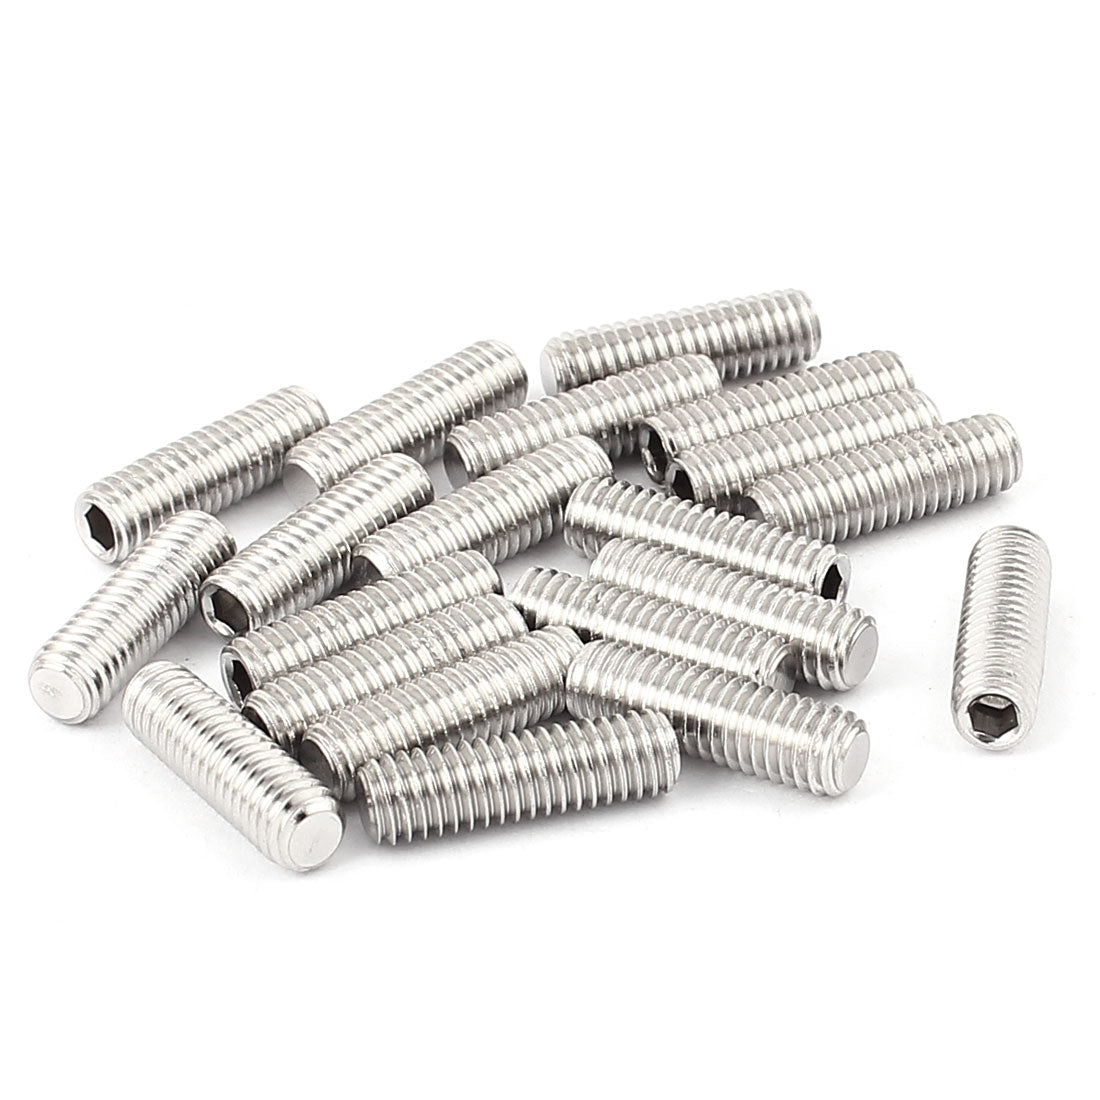 uxcell Uxcell 20pcs 304 Stainless Steel Hex Socket Grub Screws M6 x 20mm